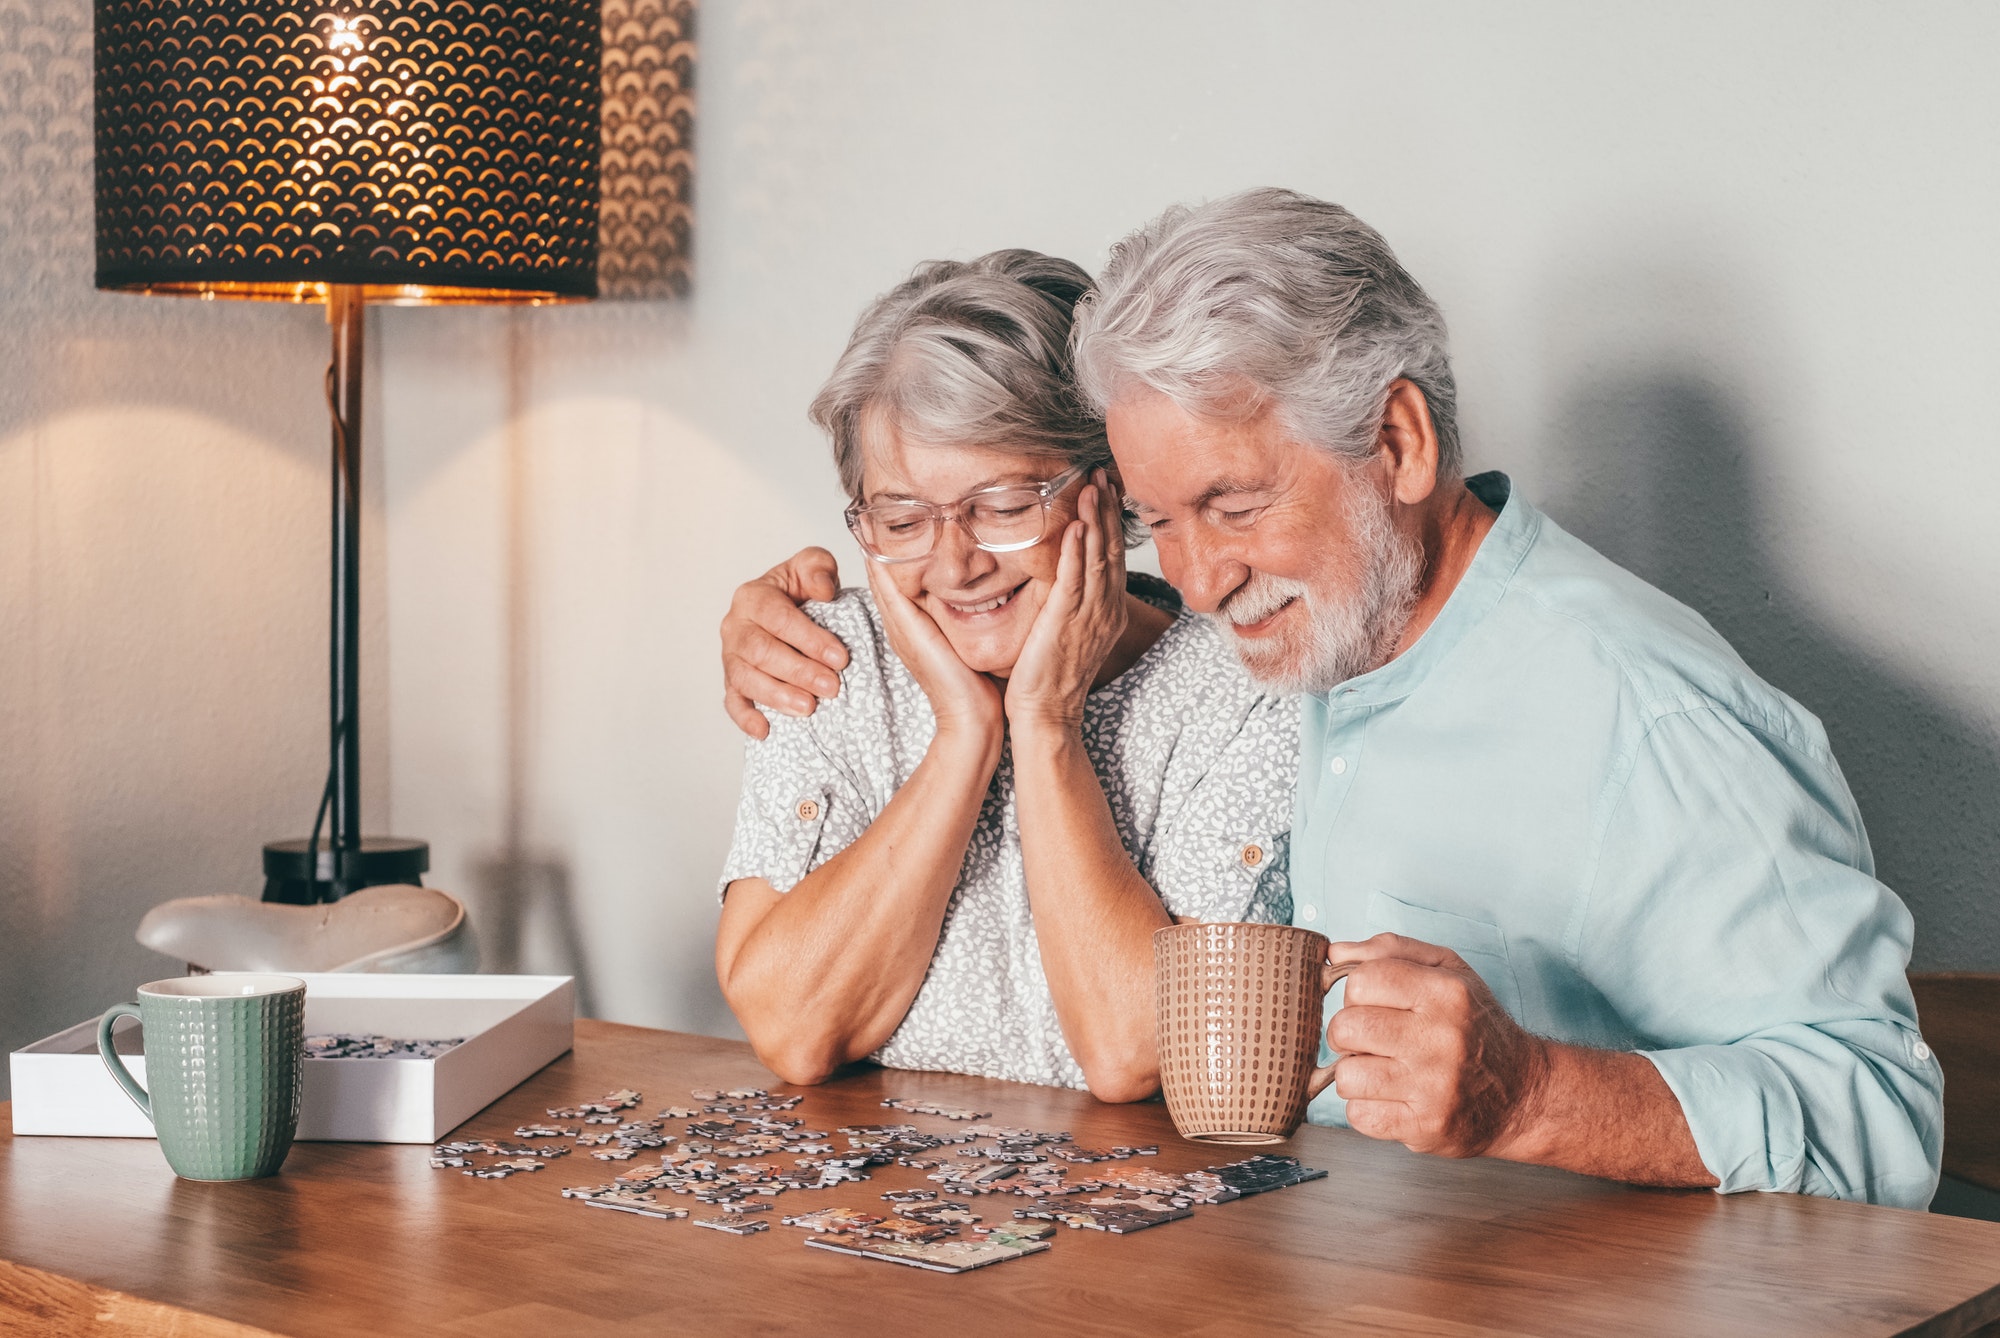 Carefree senior couple at home spend time together doing a puzzle on the wooden table